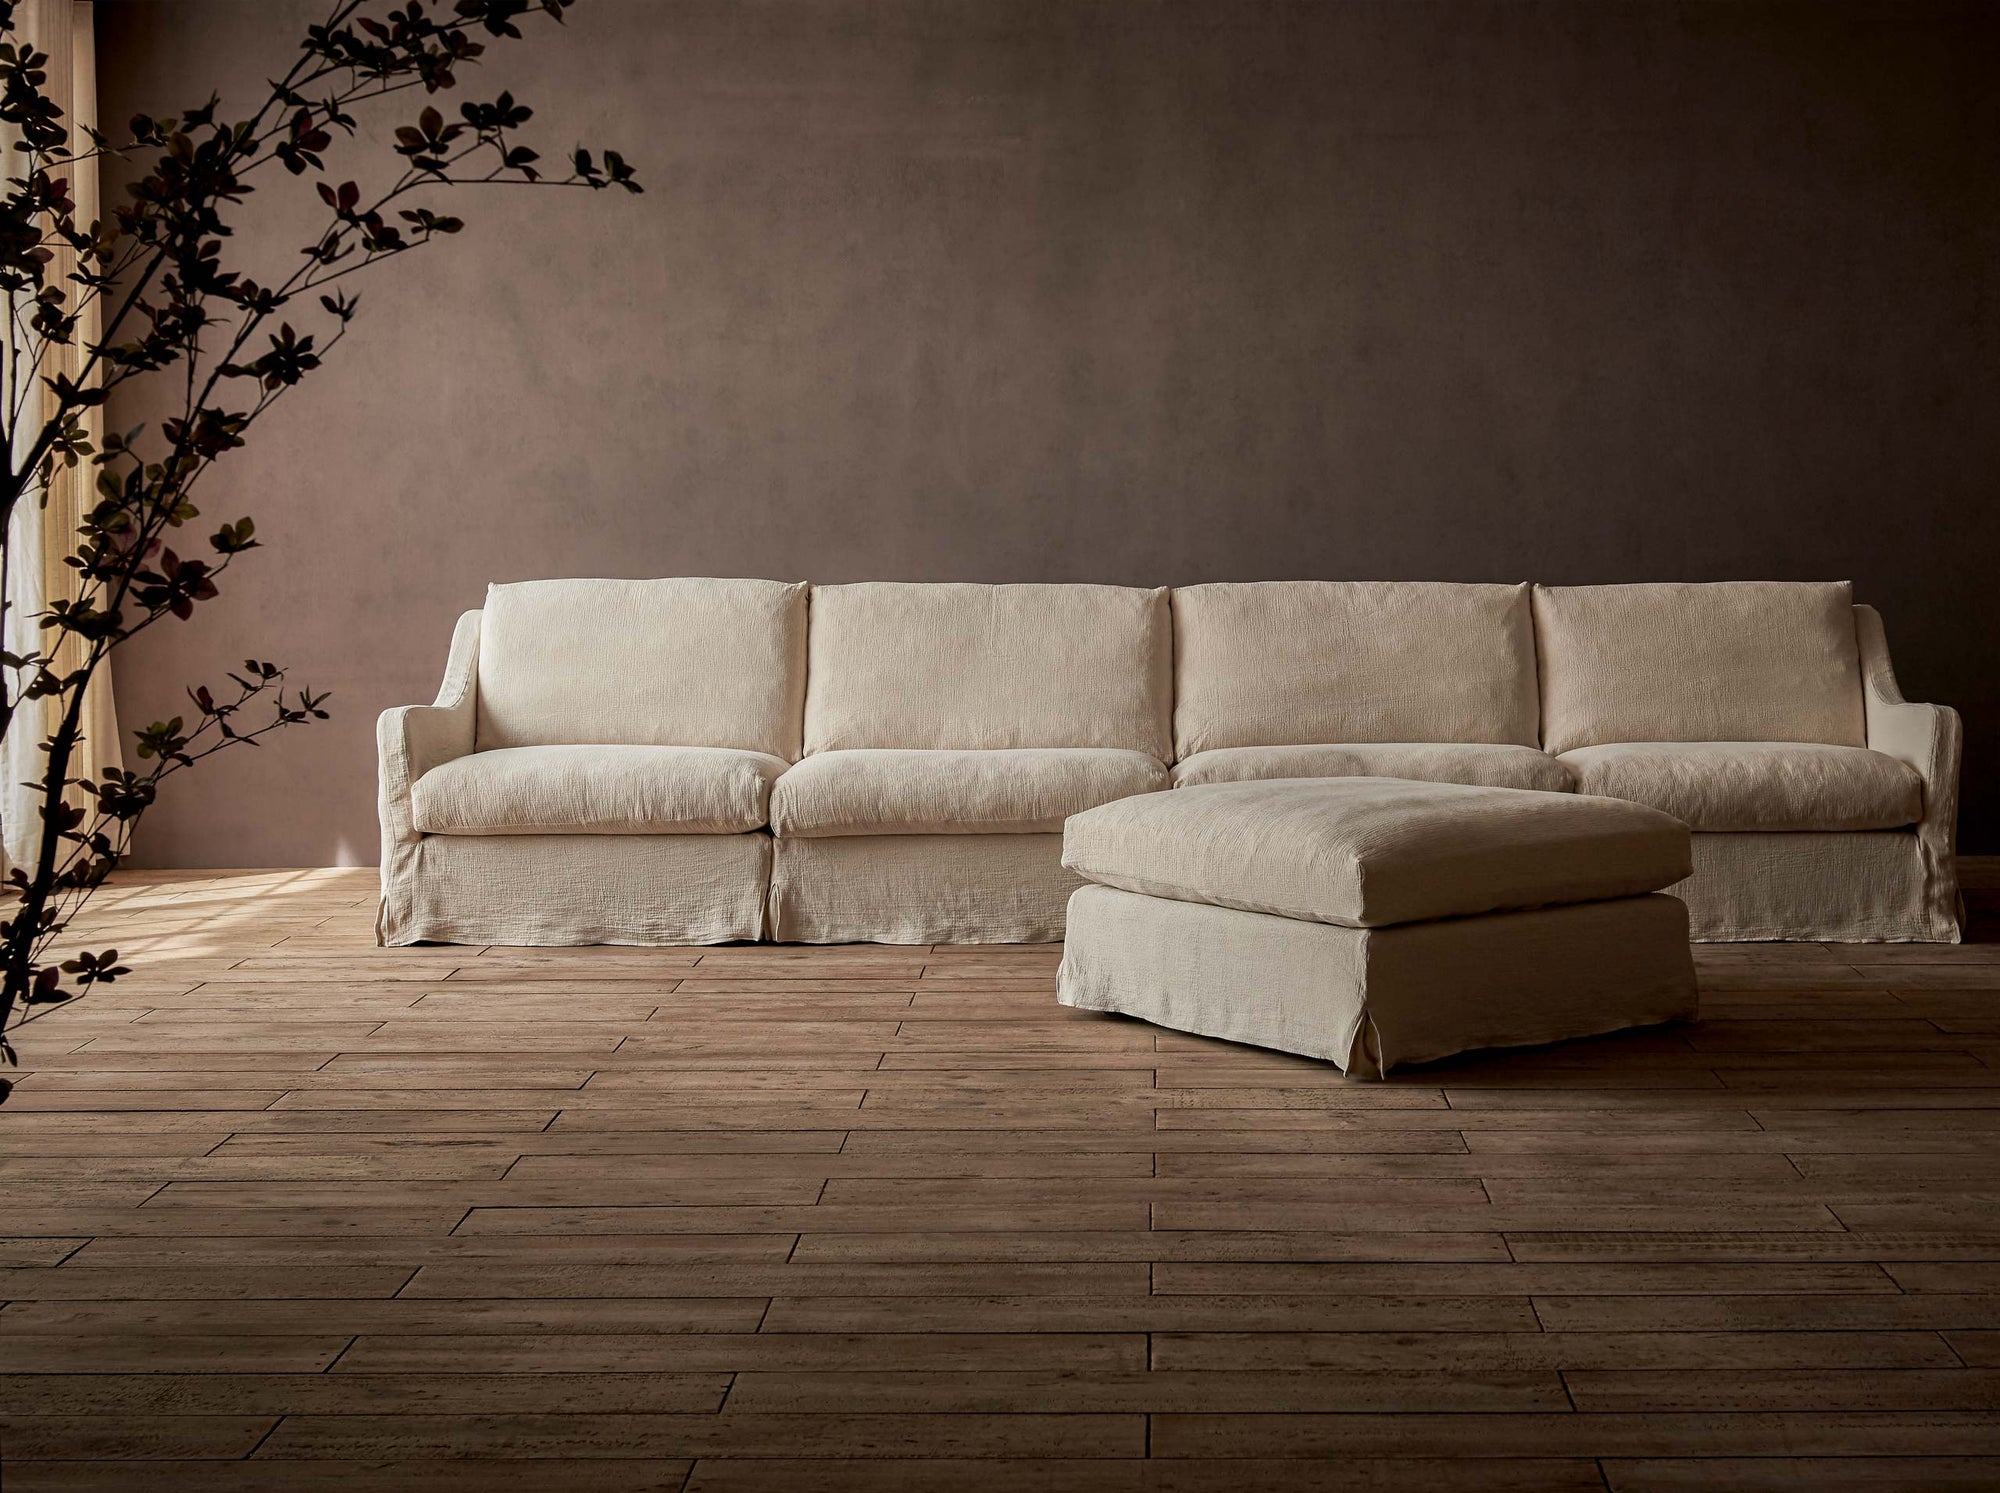 Esmé 5-piece Chaise Sectional Sofa in Corn Silk, a light beige Washed Cotton Linen, placed in a room with a potted plant